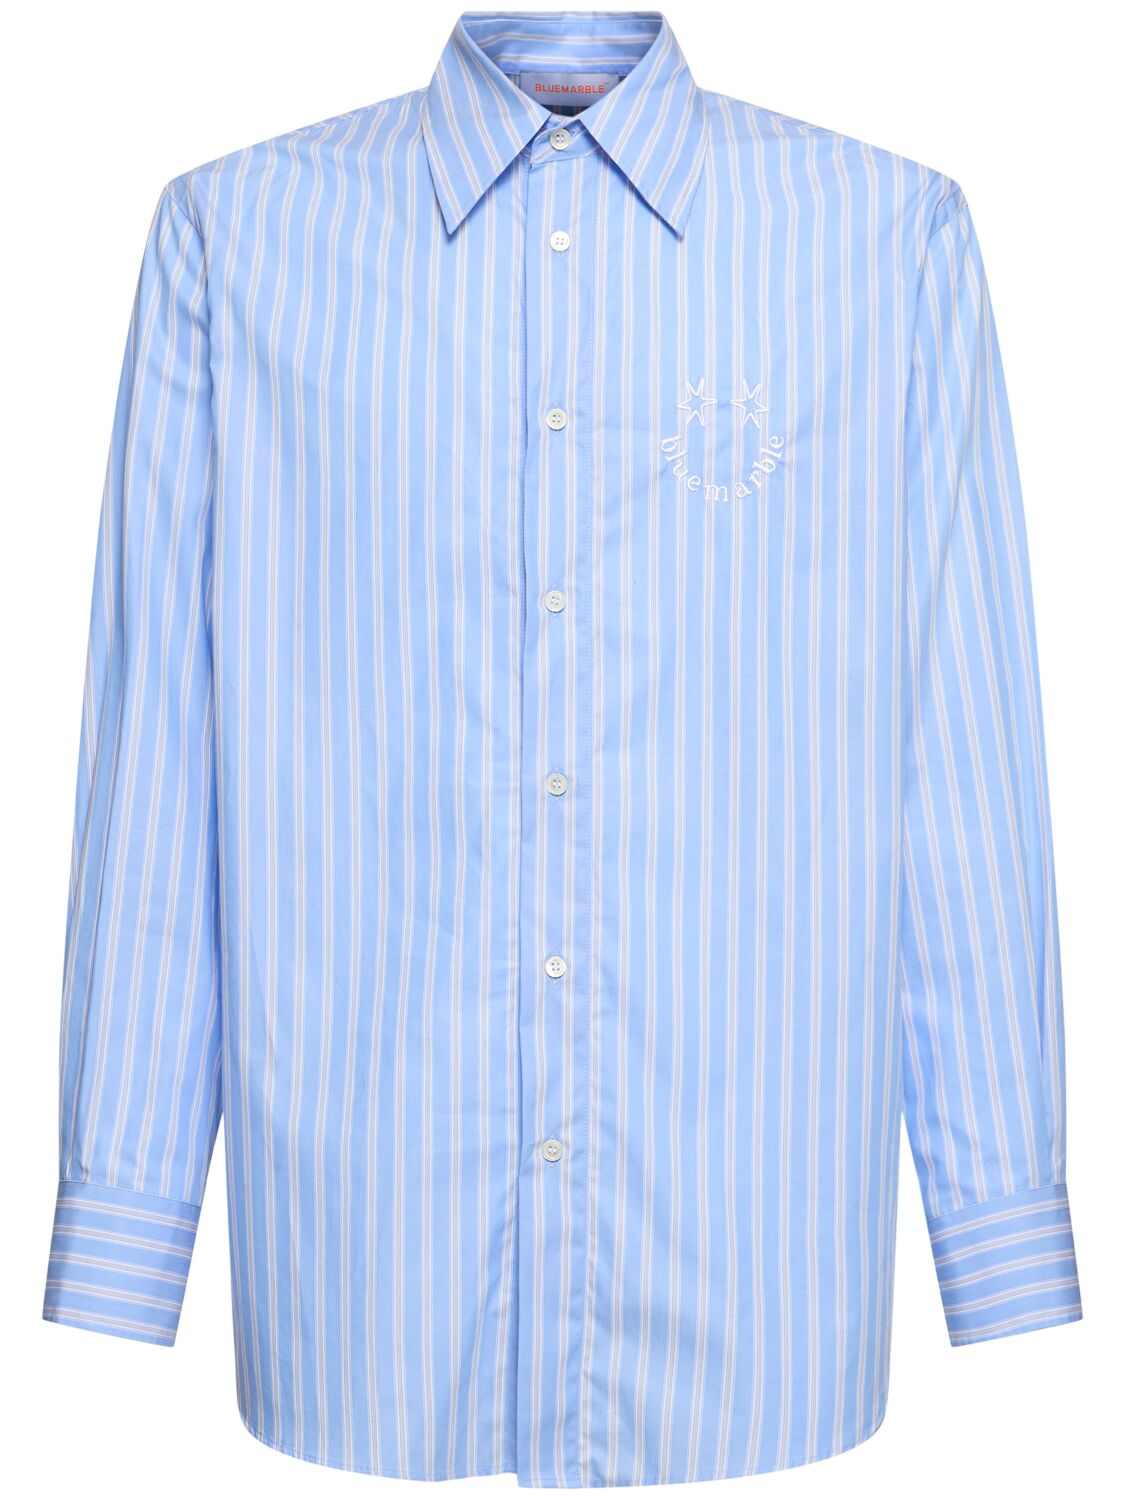 Bluemarble Smiley Striped Cotton Poplin Shirt In Patterned Blue